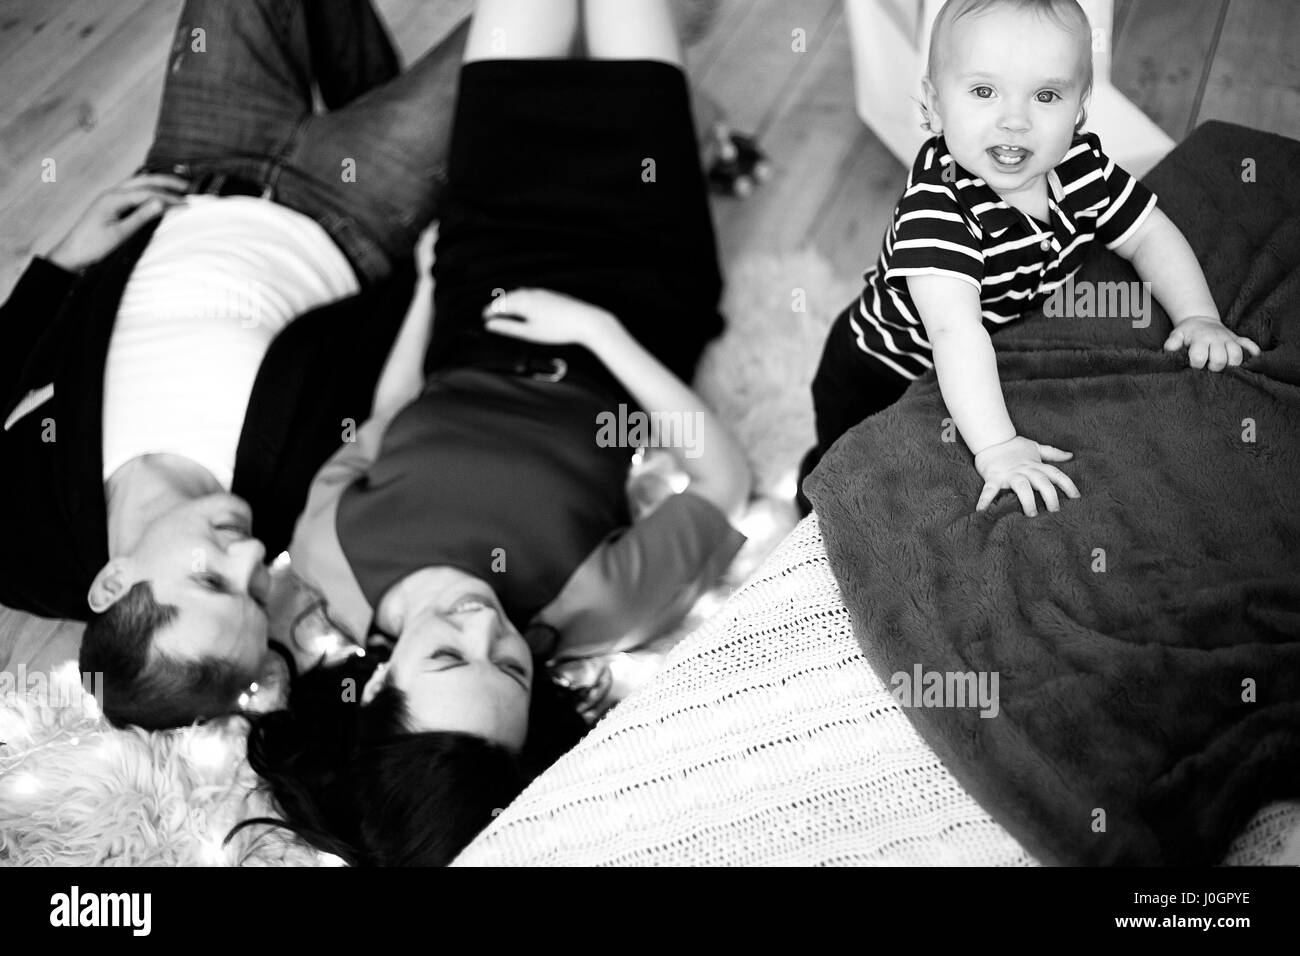 Young parents lie on carpet, baby stands nearby and smiles. Black and white image. Stock Photo